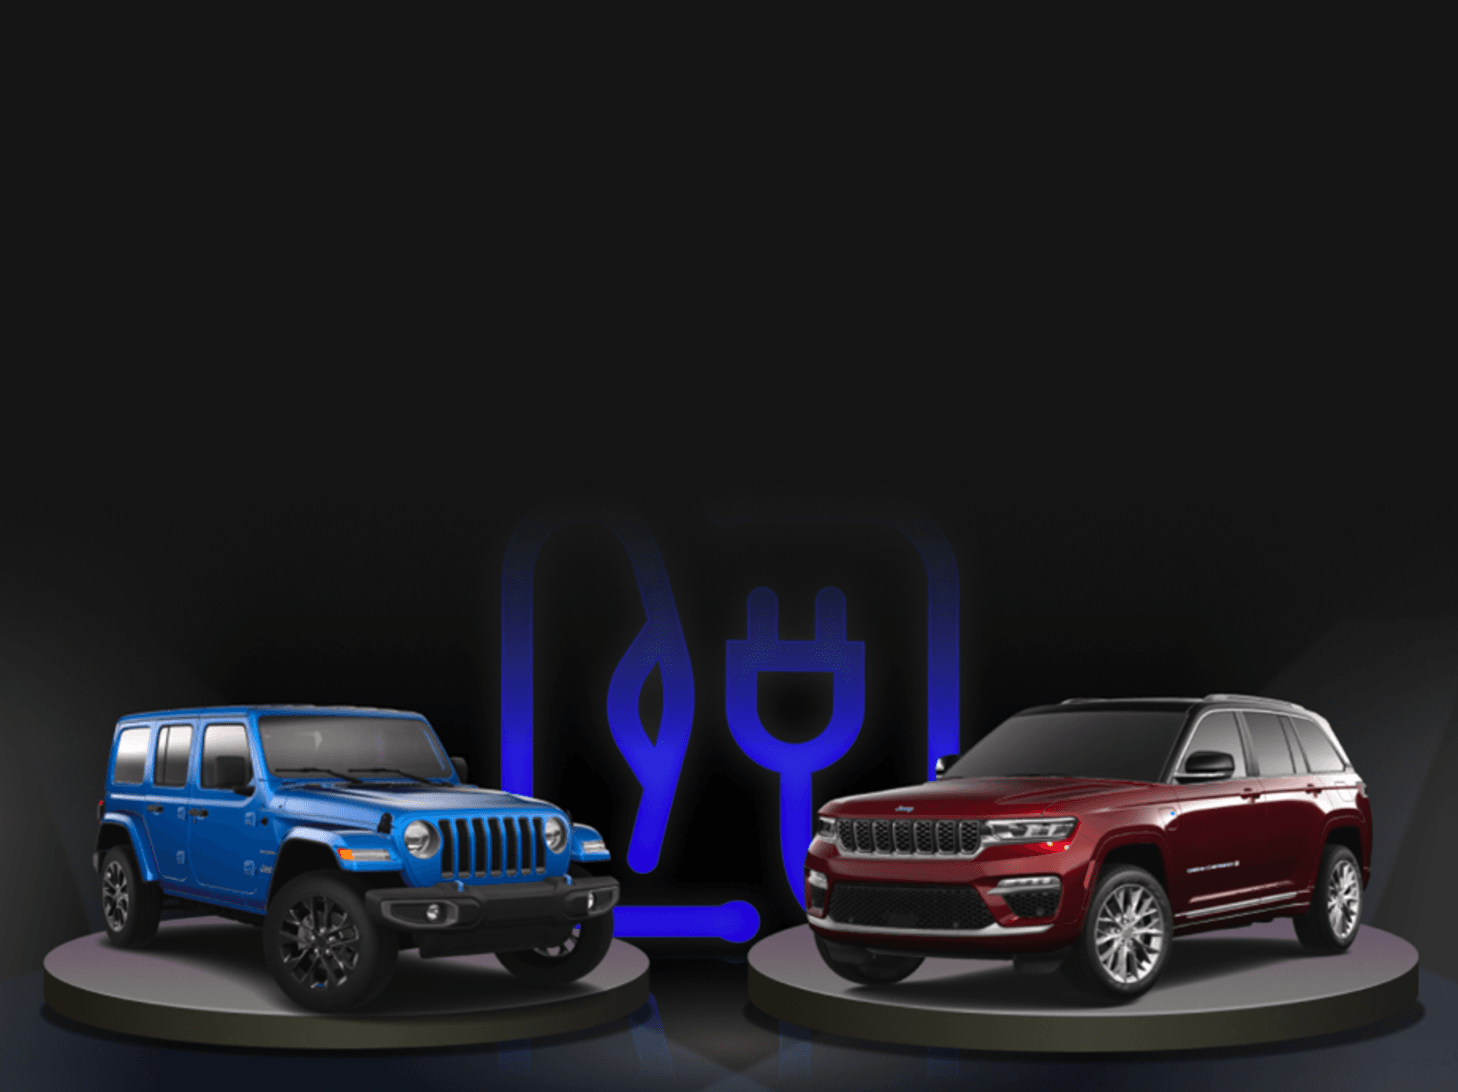 View of a bleu 2023 Jeep Wrangler and a red 2023 Jeep Grand Cherokee against a black background.